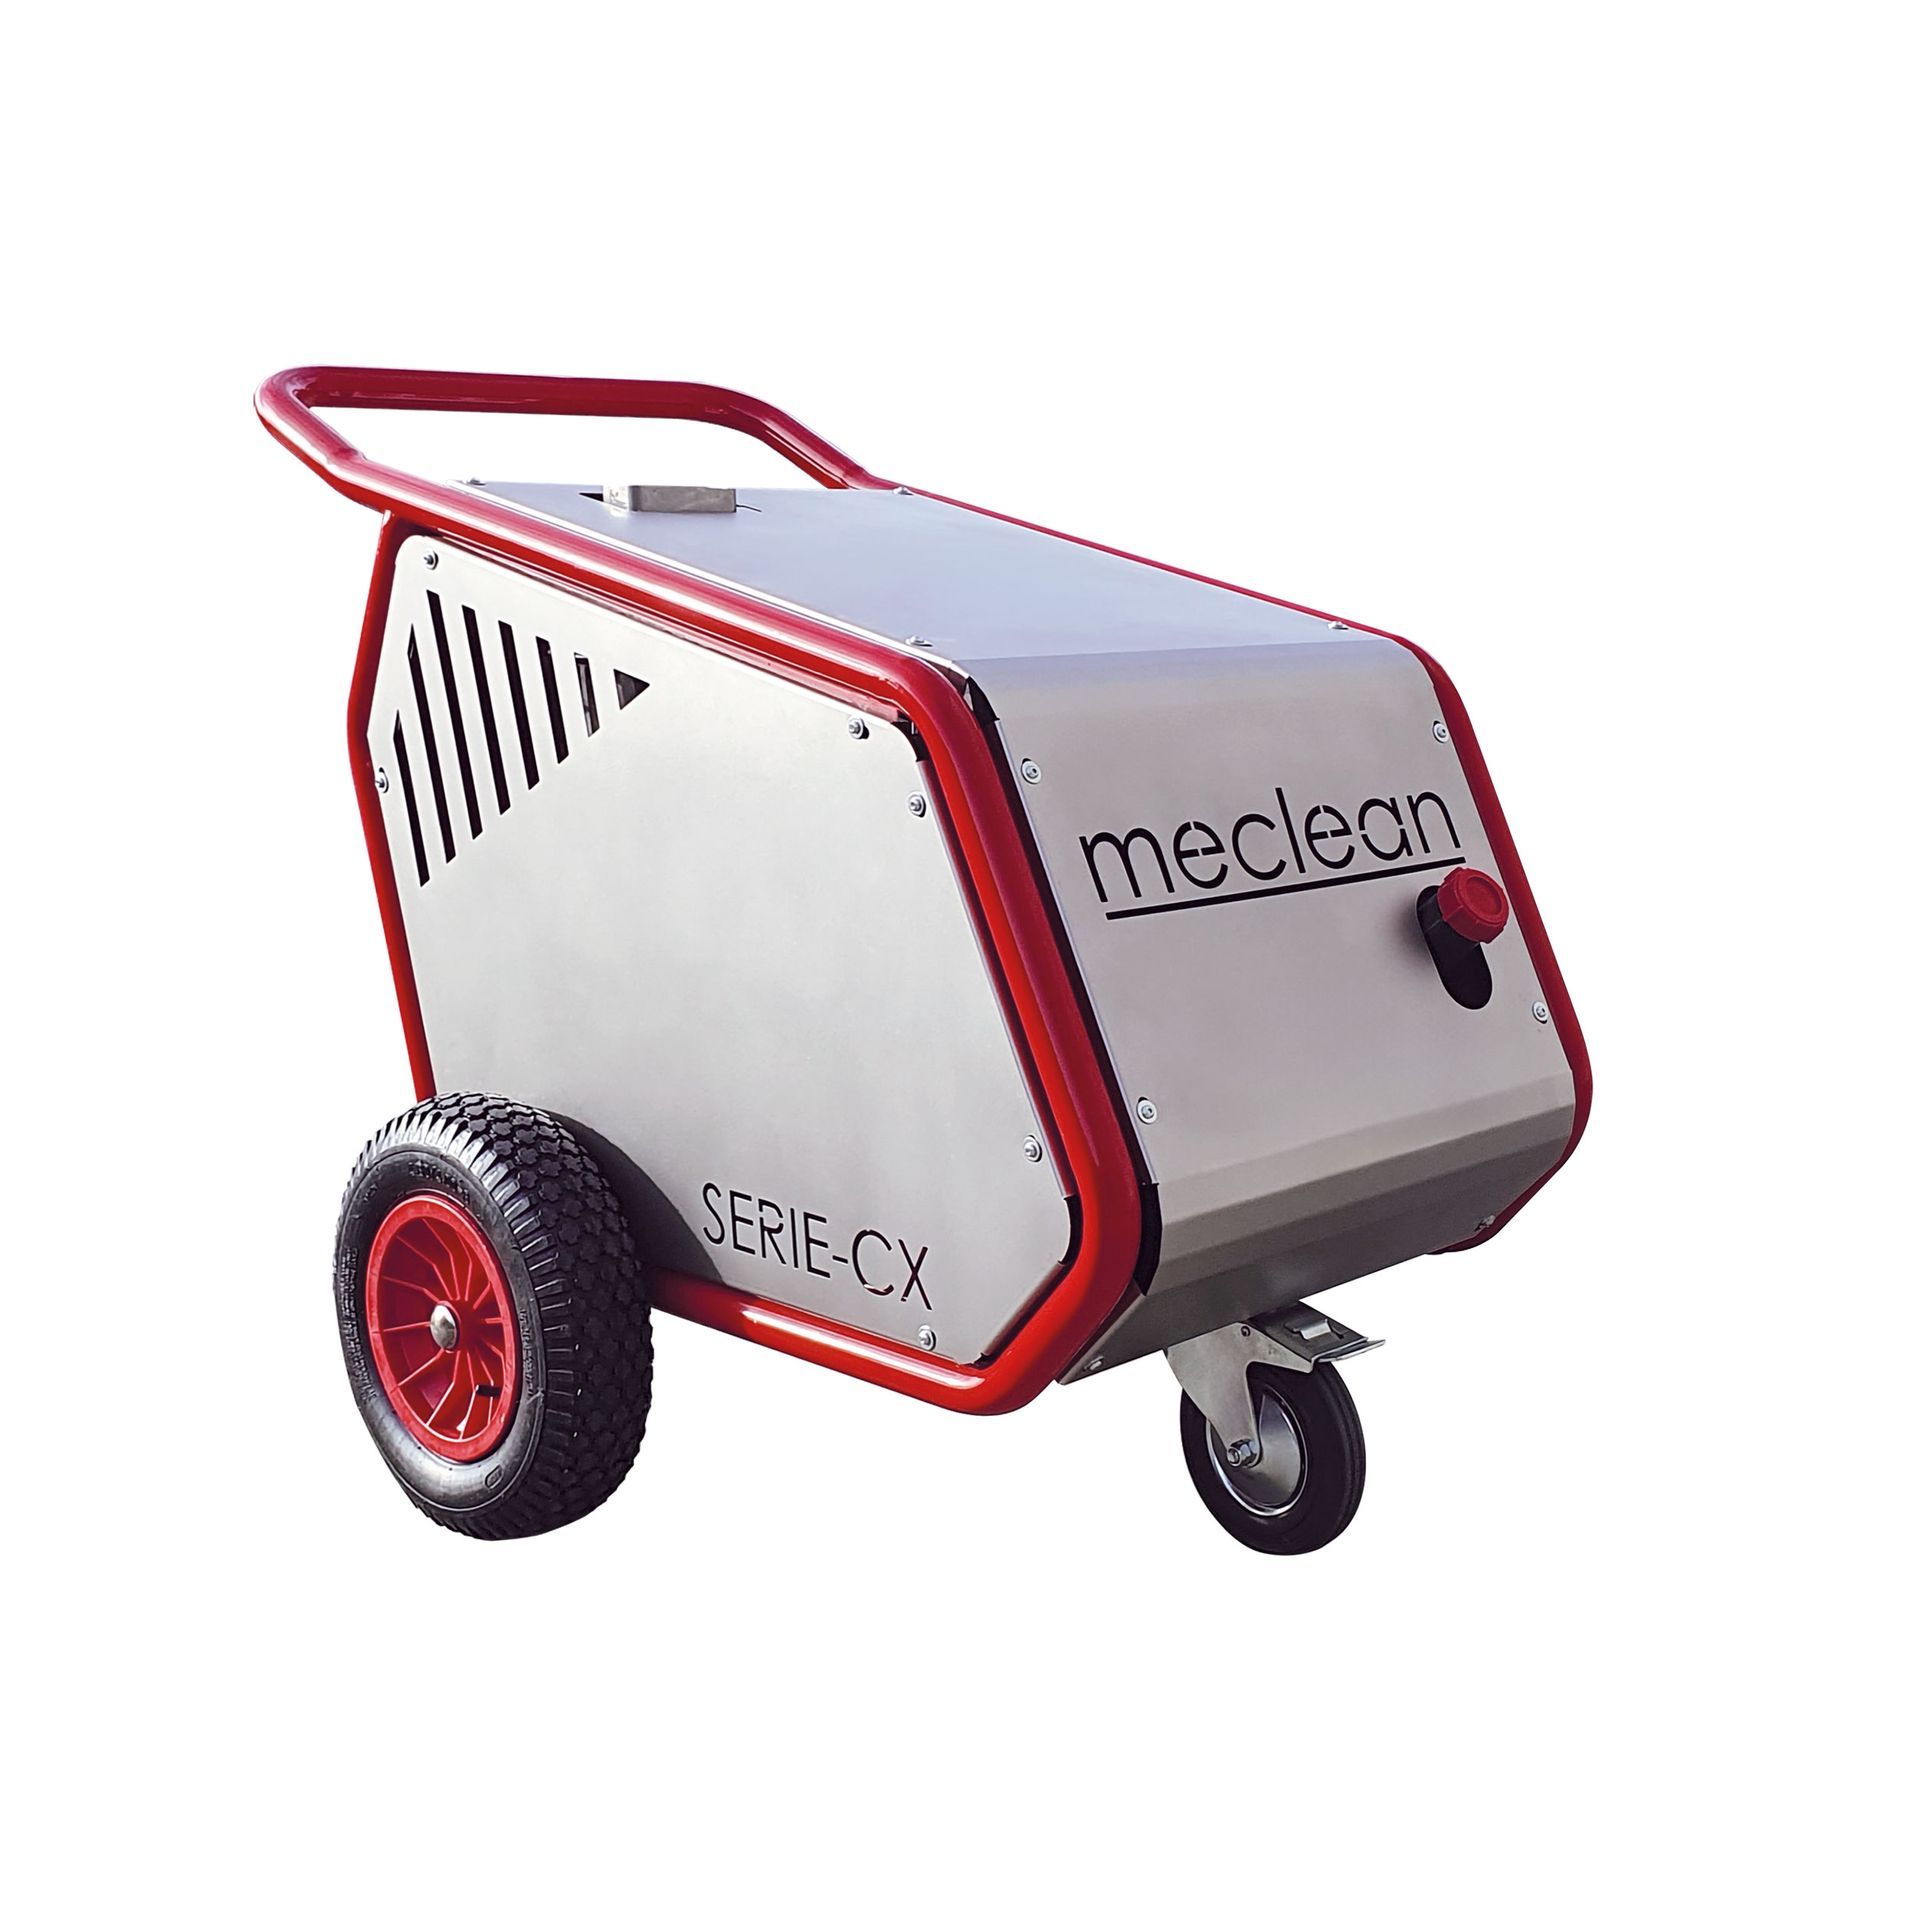 Meclean professional hot water high-pressure cleaner SERIE-CX 120/8 with WeedPLUS